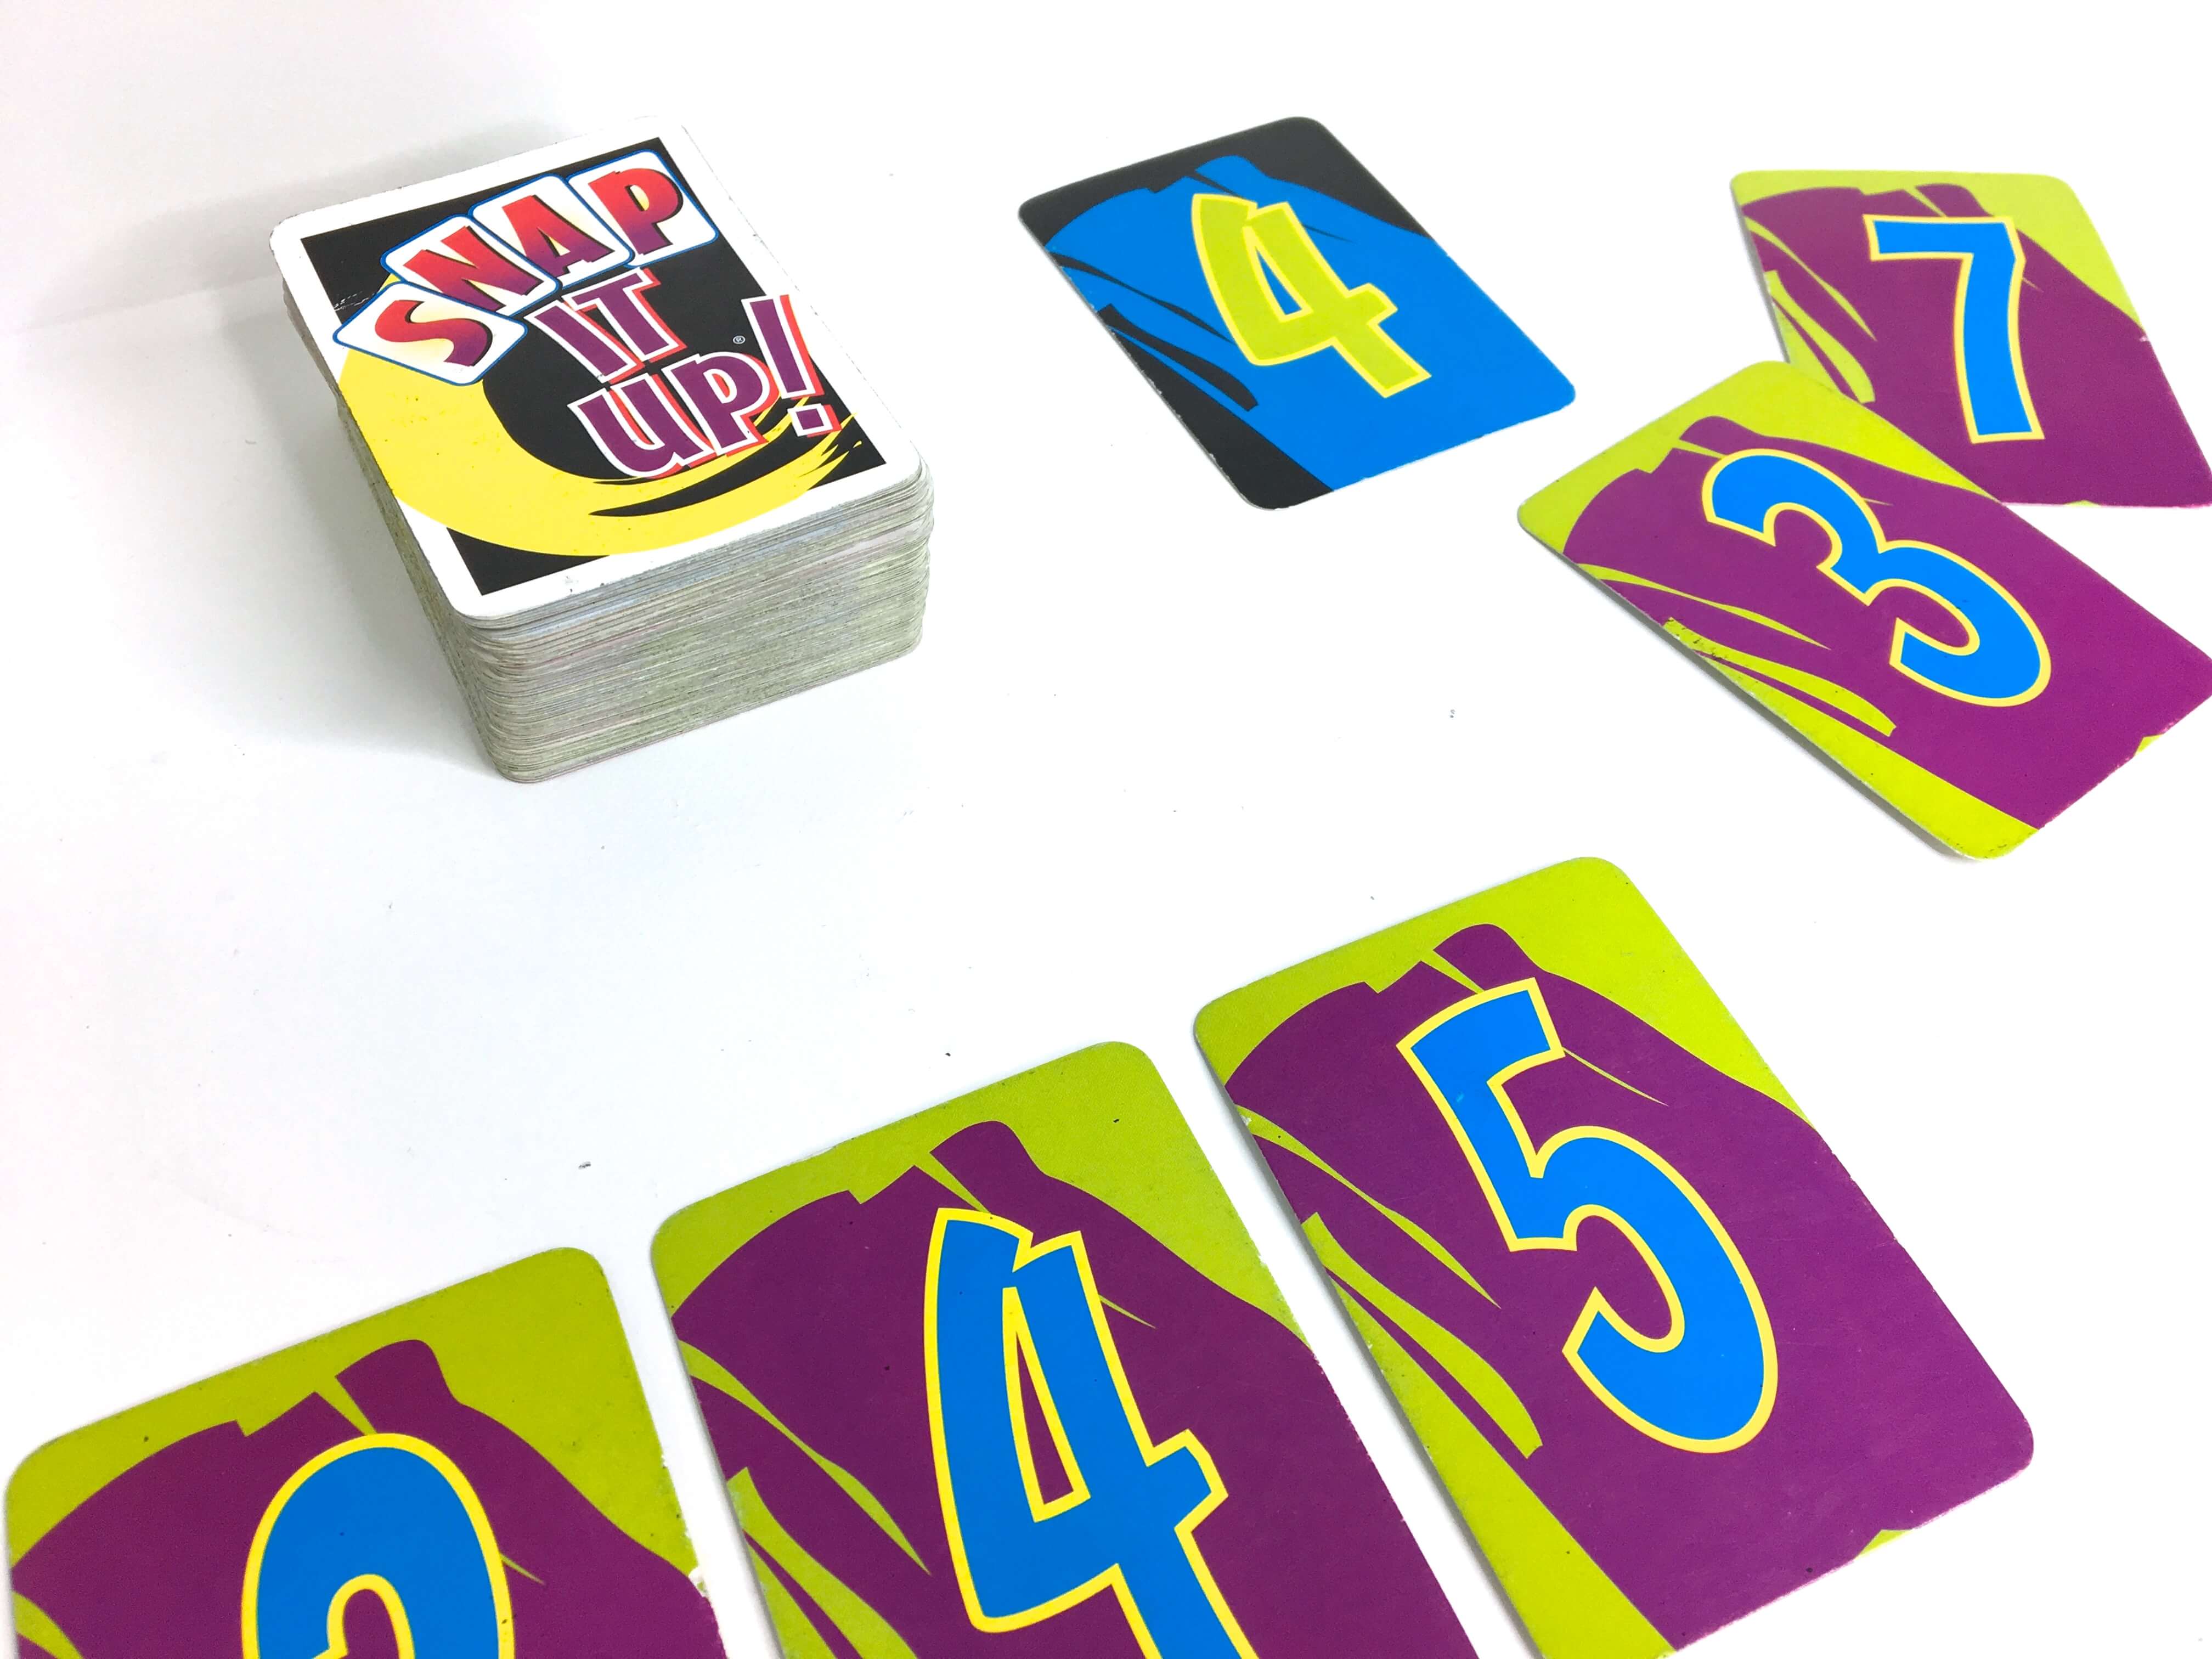 Math Board Games are a FUN way to build fluency and mental-math skills during math centers or guided math blocks. Check out these 7 games perfect for 1st and 2nd grade mathematicians! 